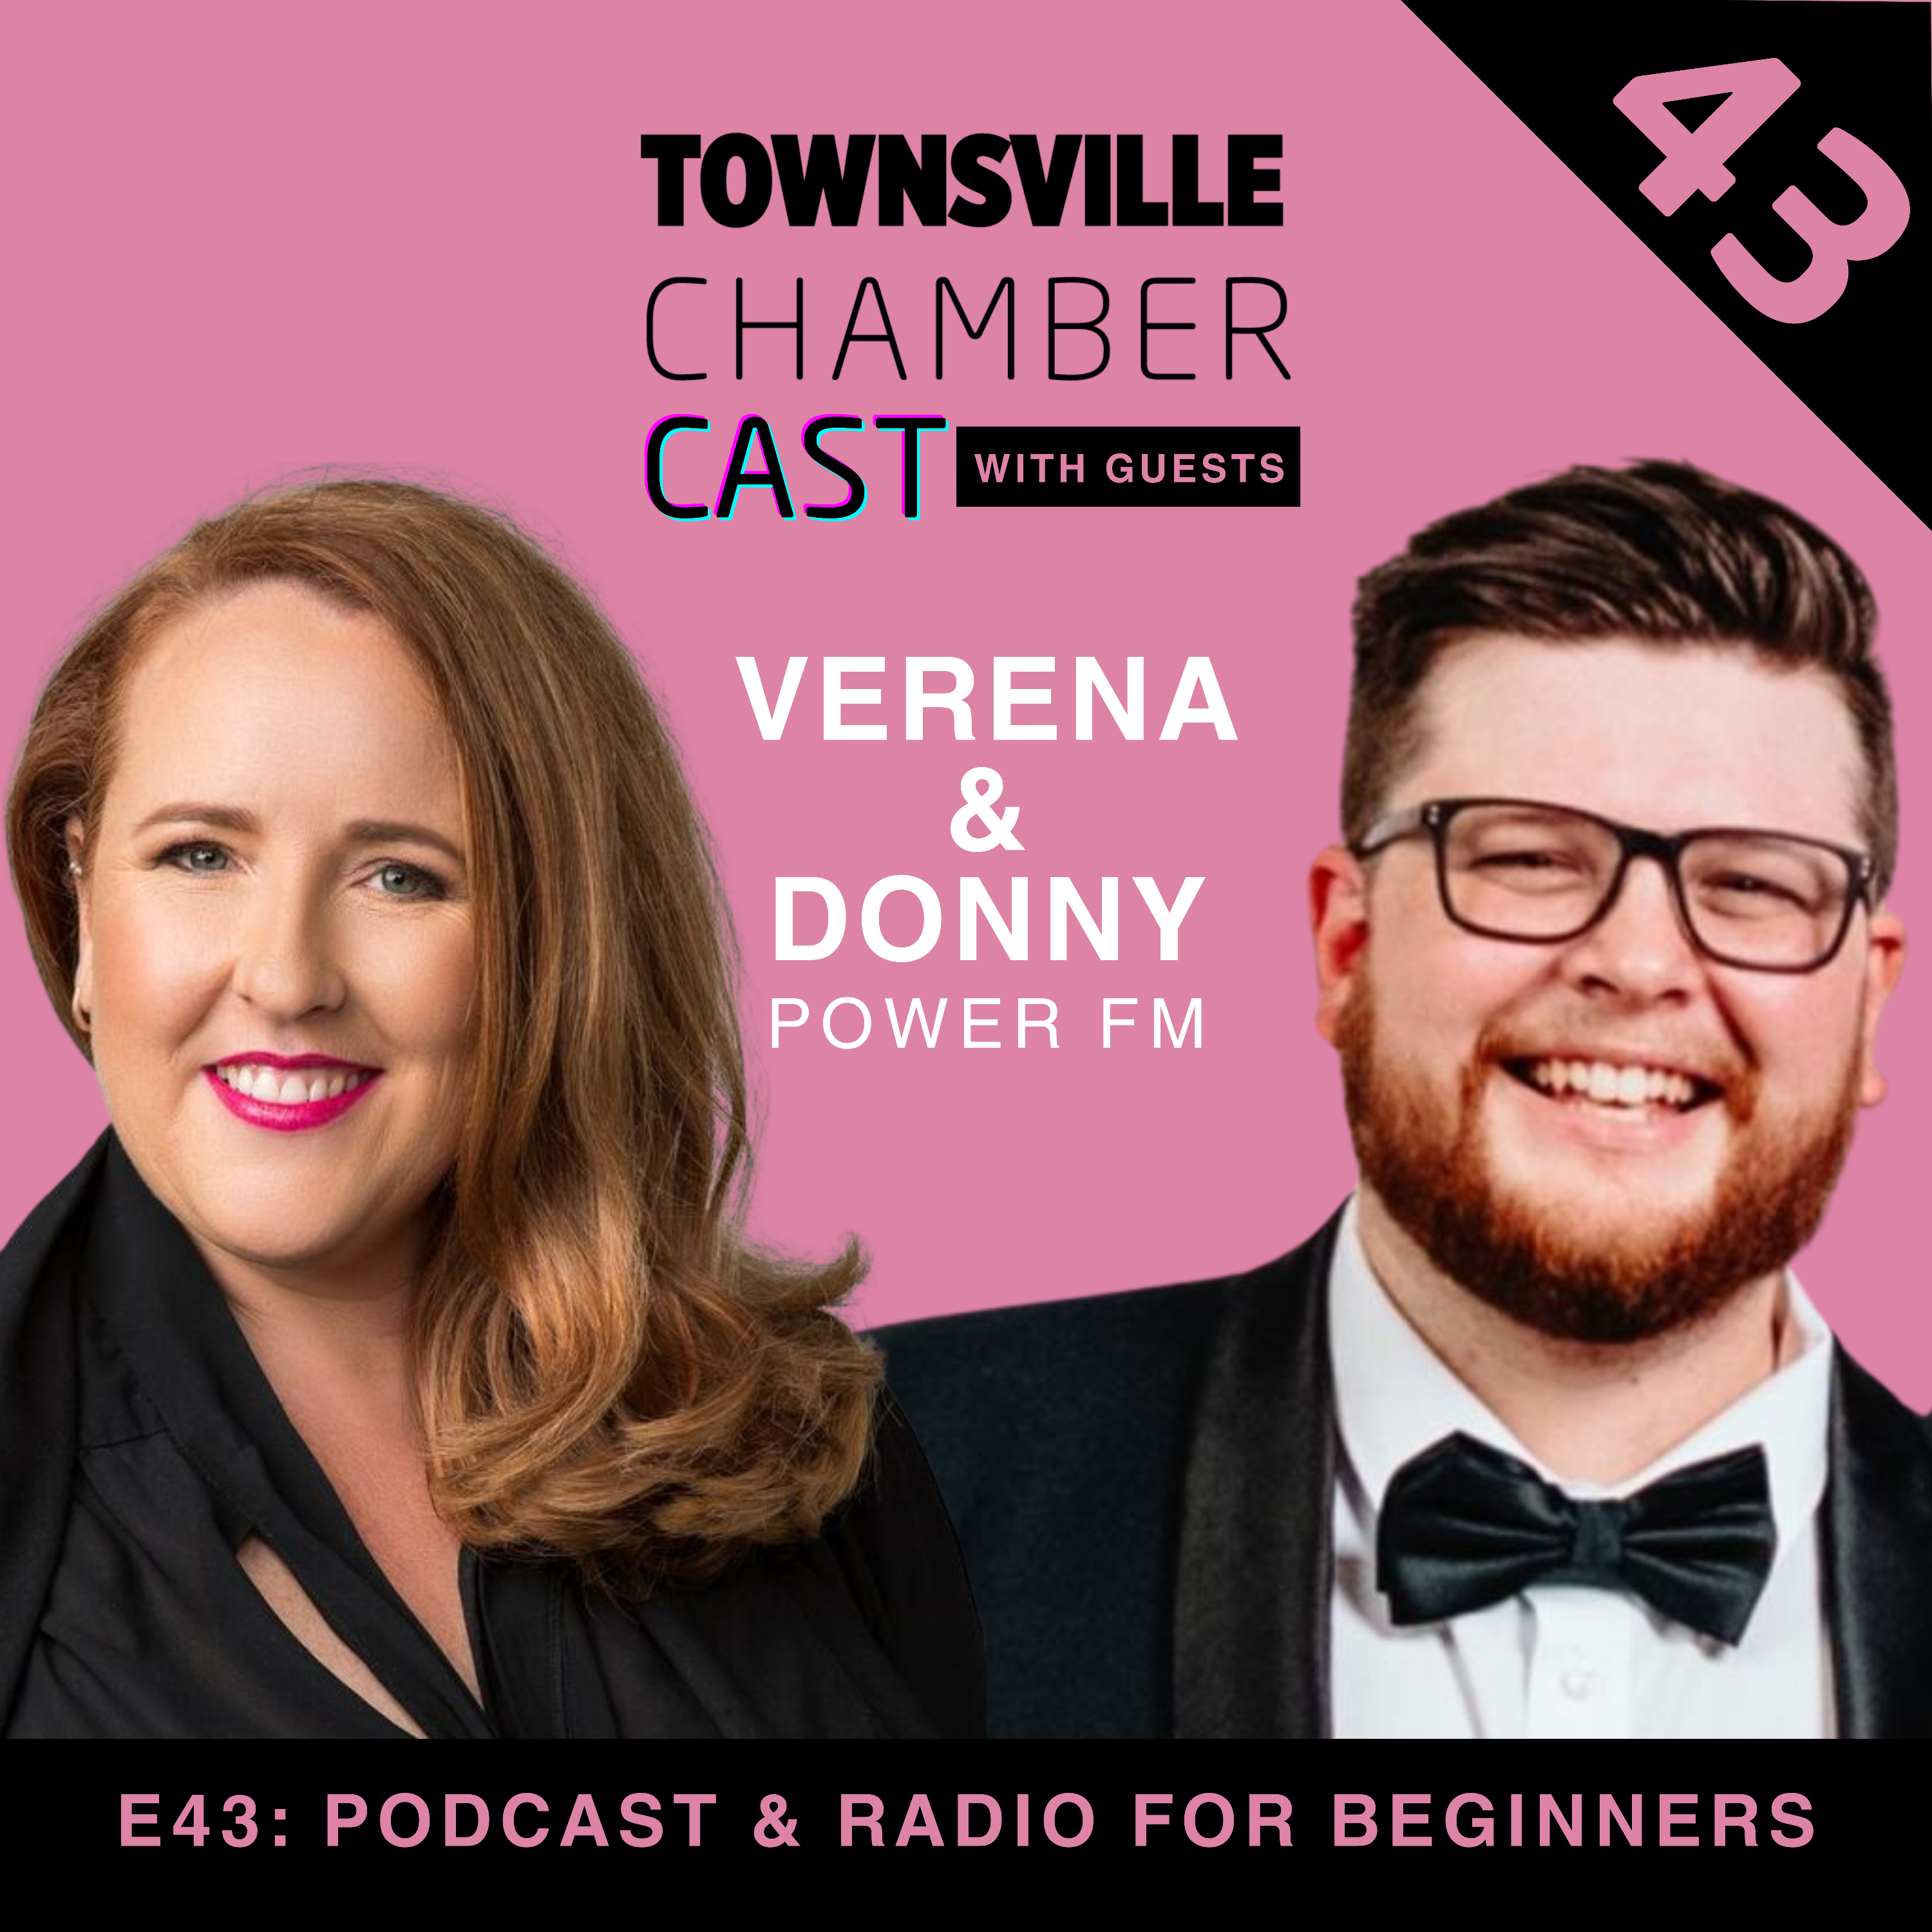 Podcast & Radio for Beginners with Verena Louise and Donny Watkin